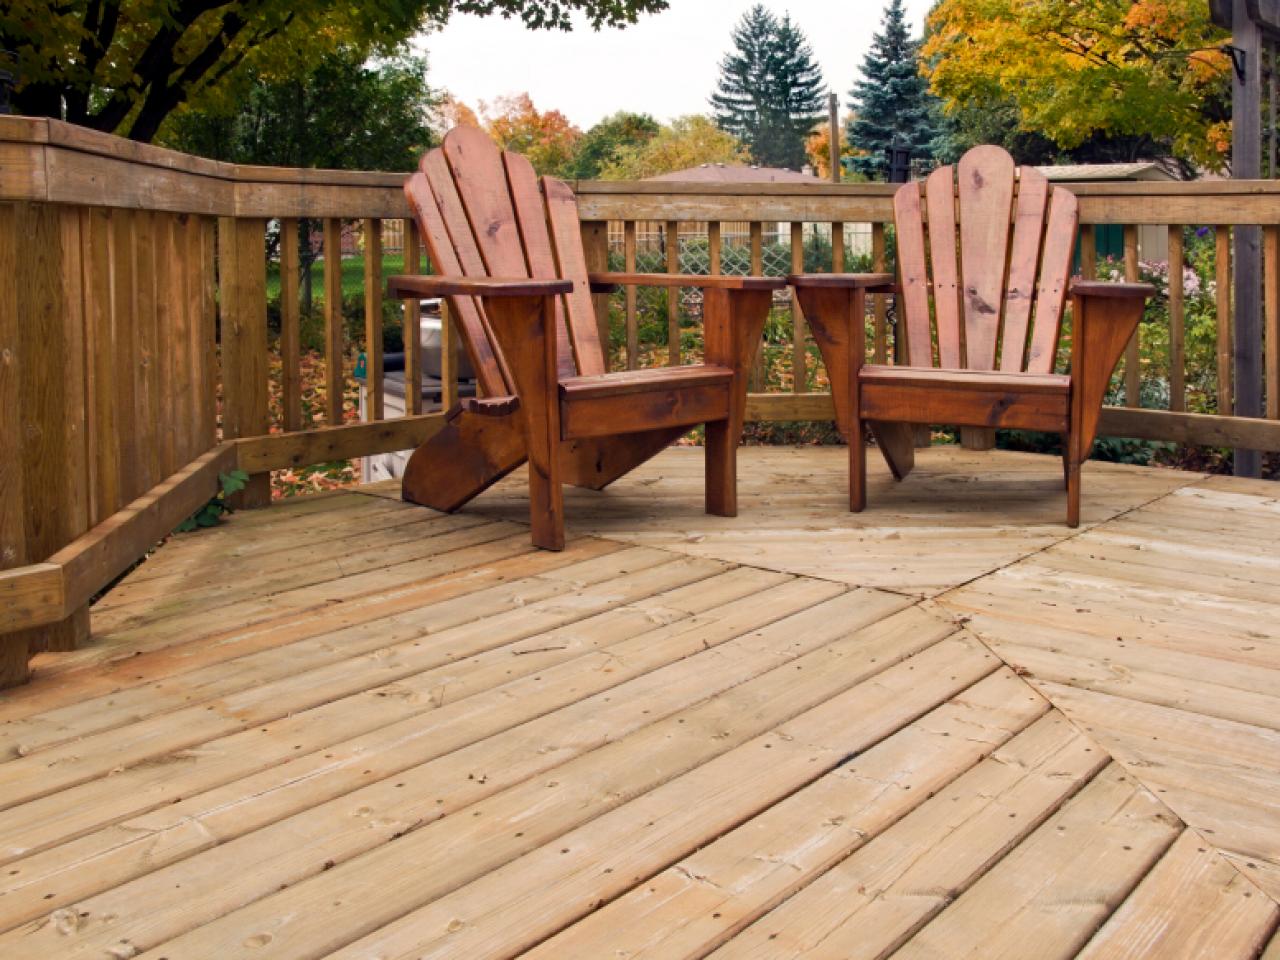 Wood Decking Materials, What Can I Cover My Wood Deck Floor With